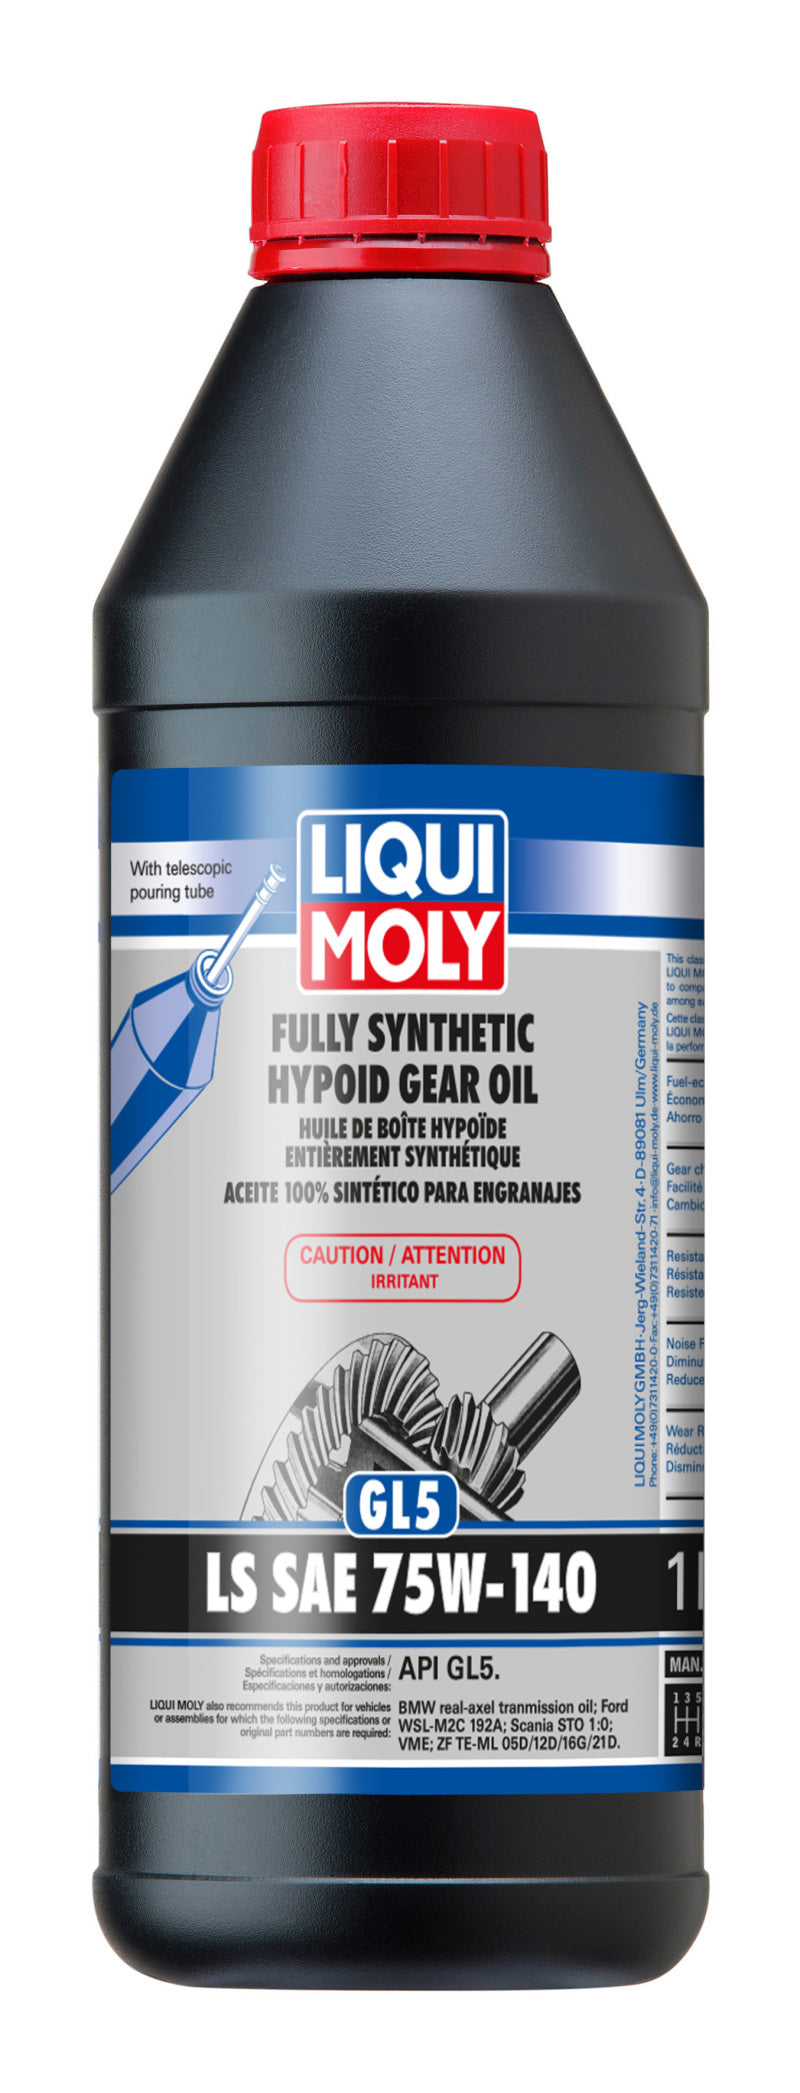 LIQUI MOLY 1L Fully Synthetic Hypoid Gear Oil (GL5) LS SAE 75W140.